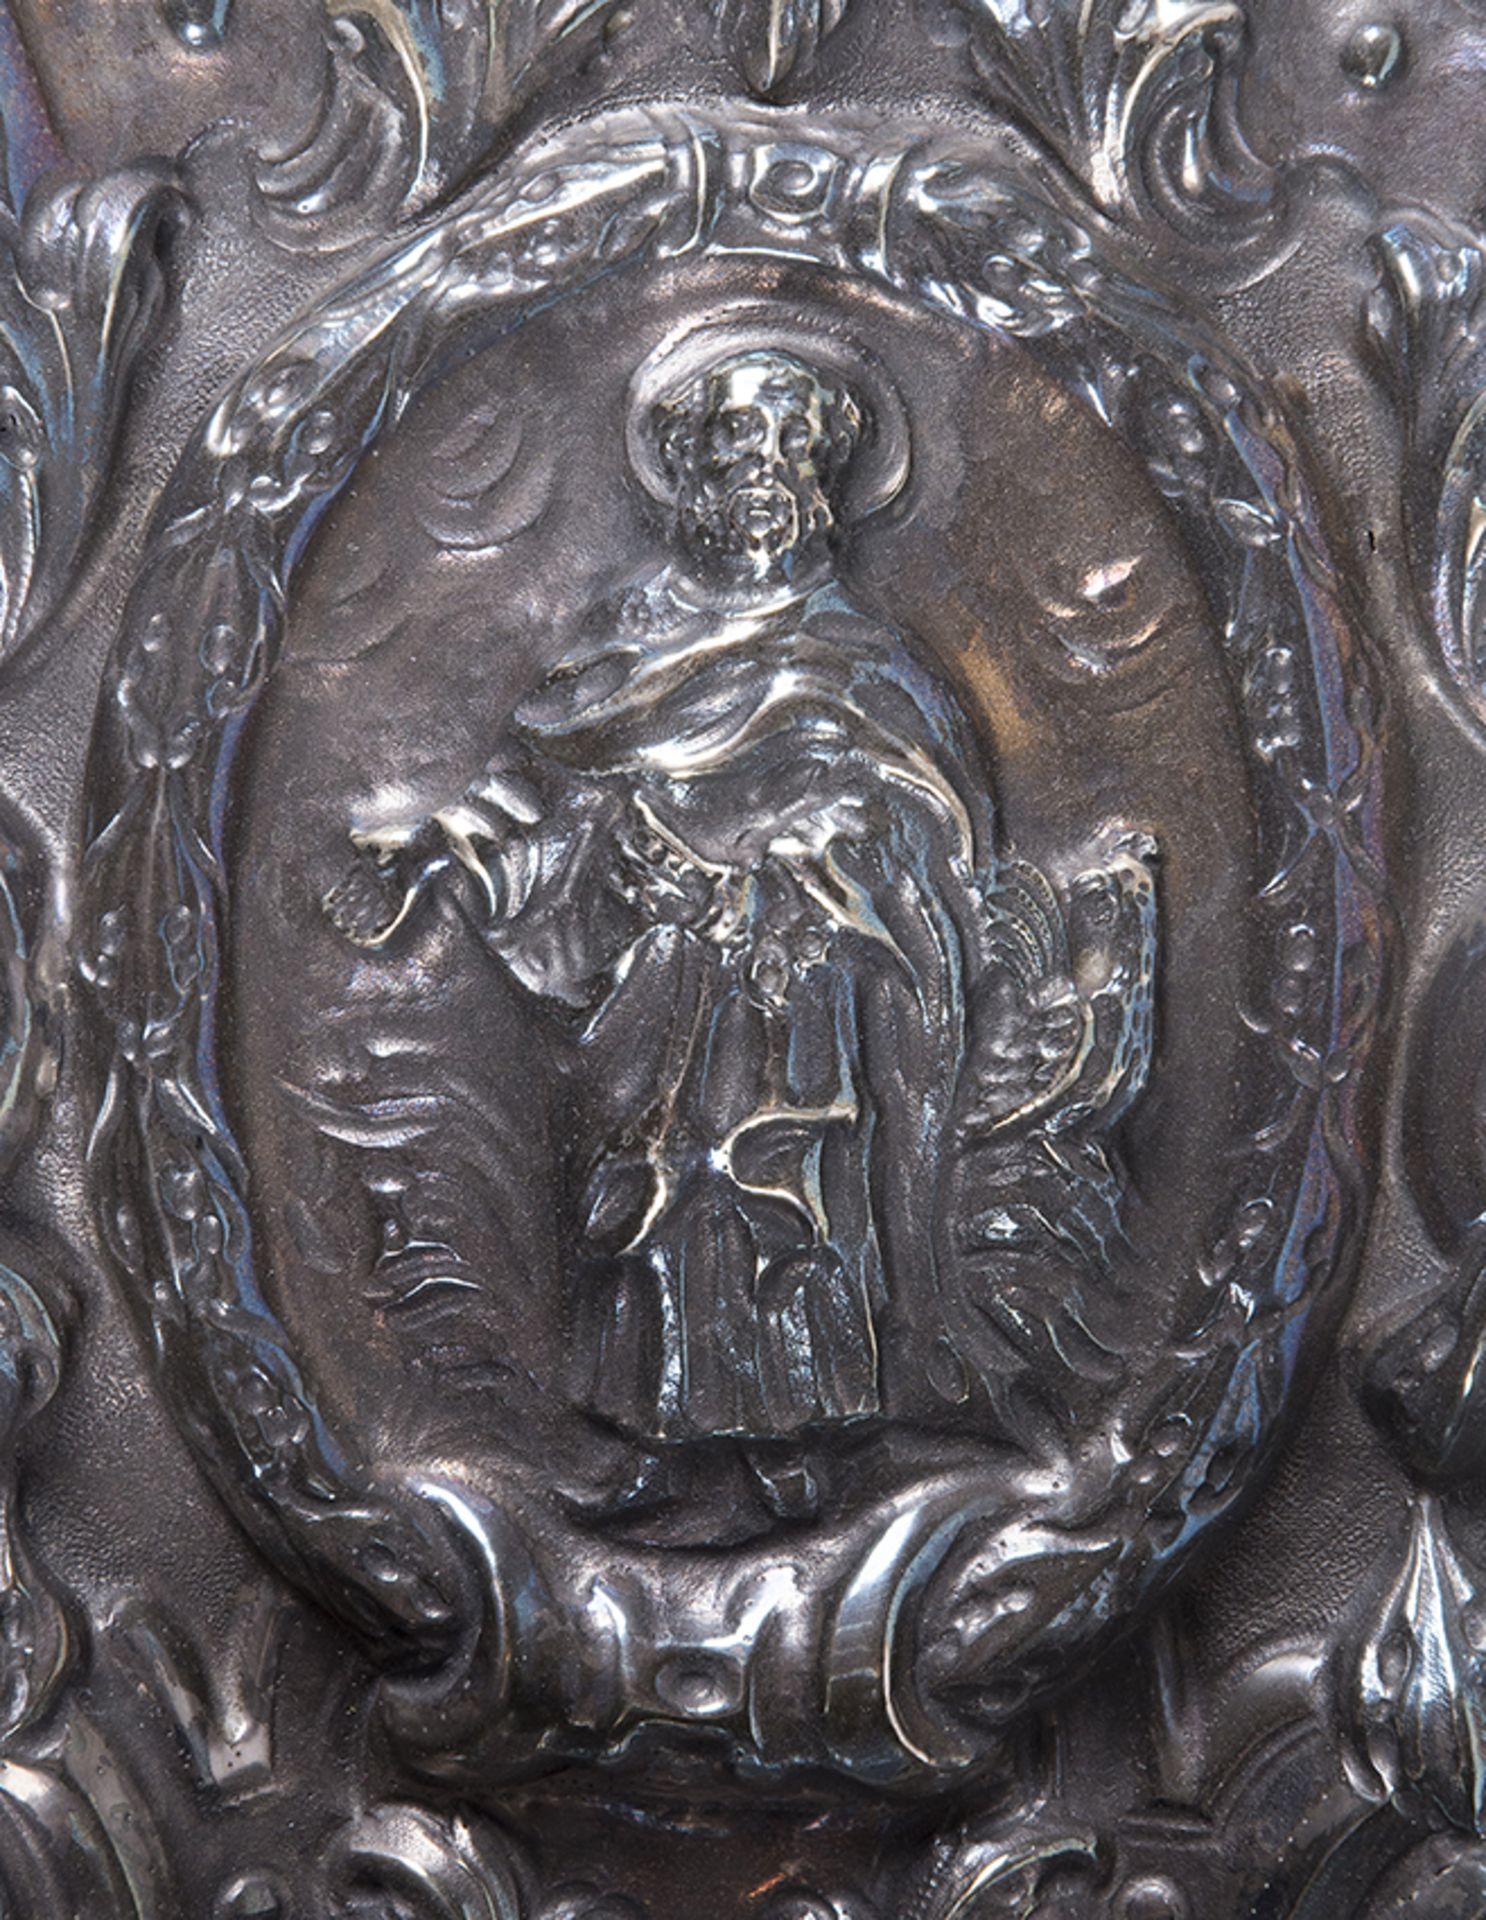 Pierced, embossed and chiselled silver home stoup. 18th century. - Image 2 of 4